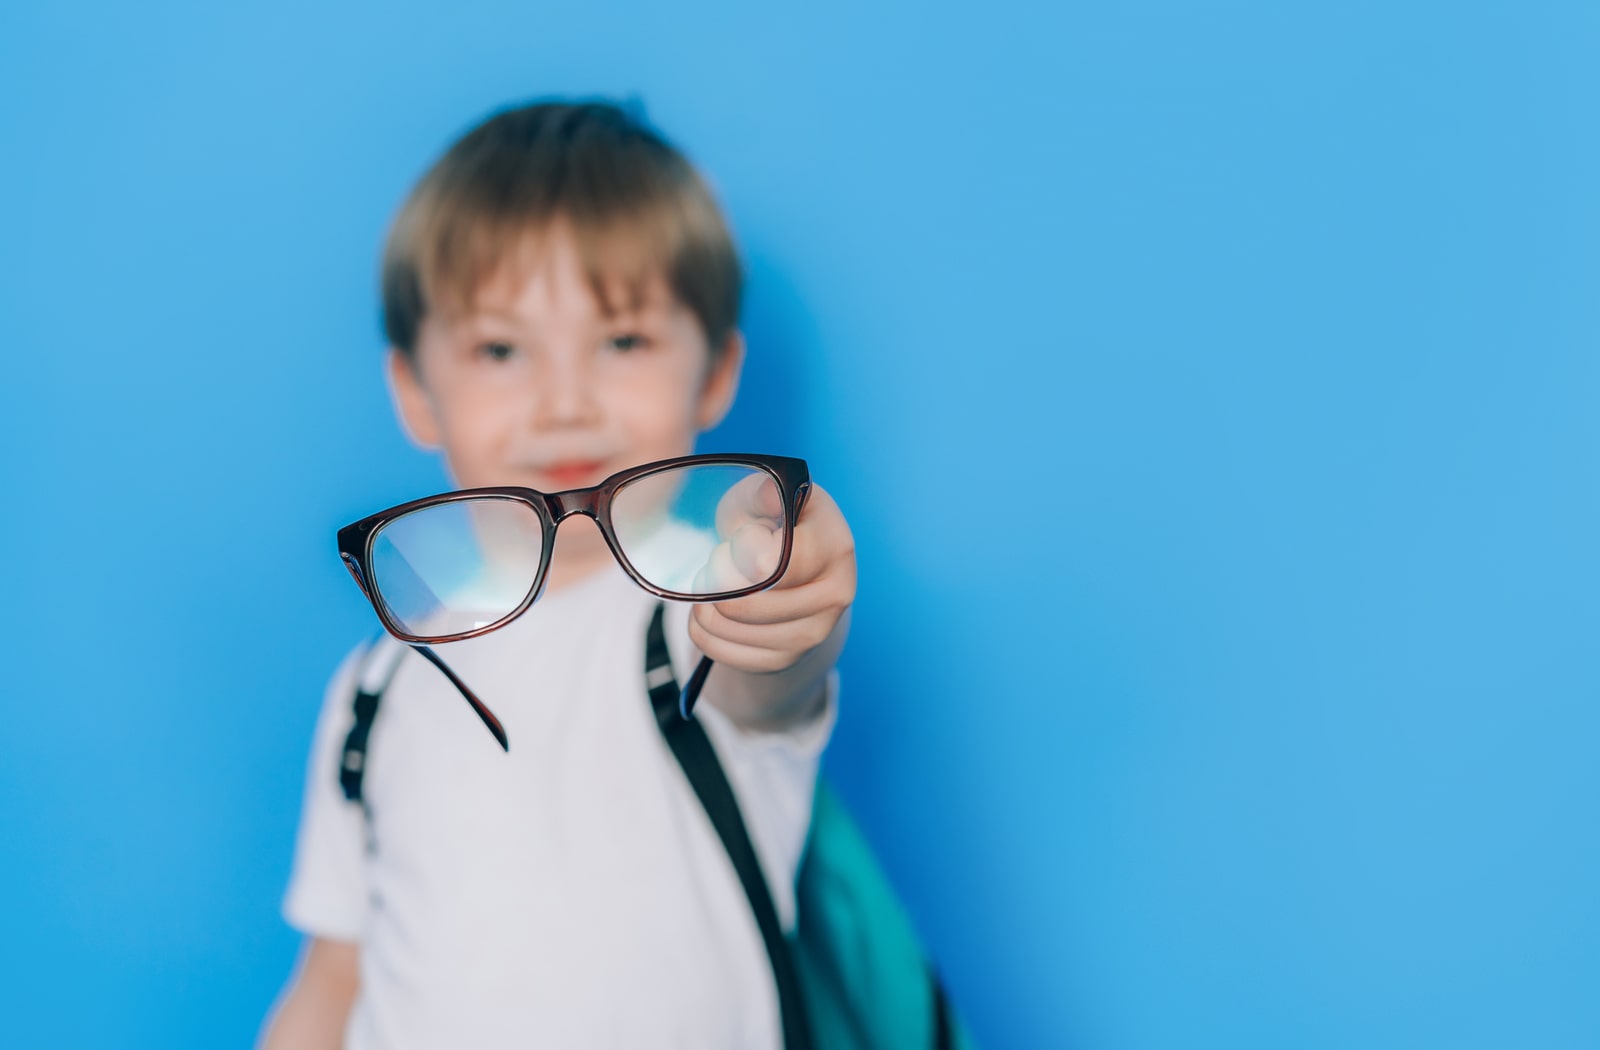 A boy holding a pair of prescription glasses out in front of him